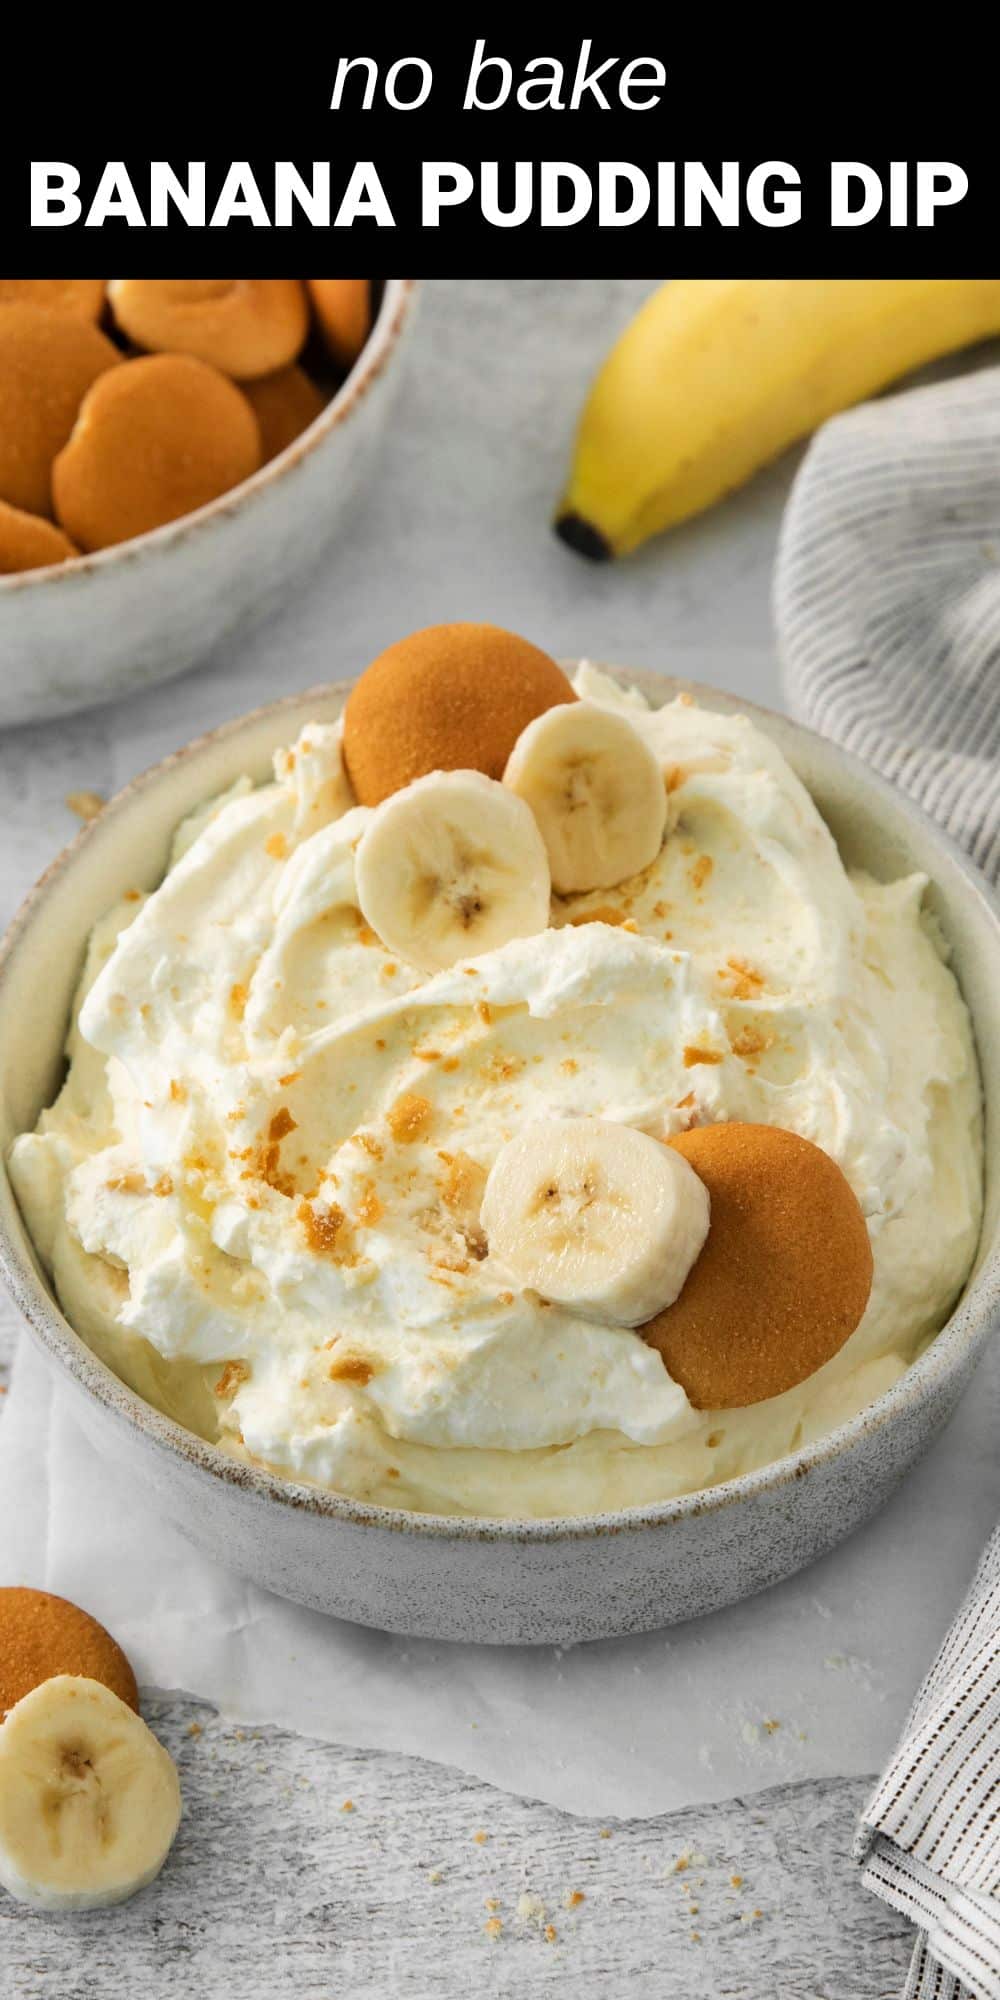 This easy banana pudding dip is the perfect make-ahead treat! It starts with rich banana pudding, folded with whipped cream cheese and fresh whipped cream before being mixed with fresh diced banana and crisp vanilla wafers.